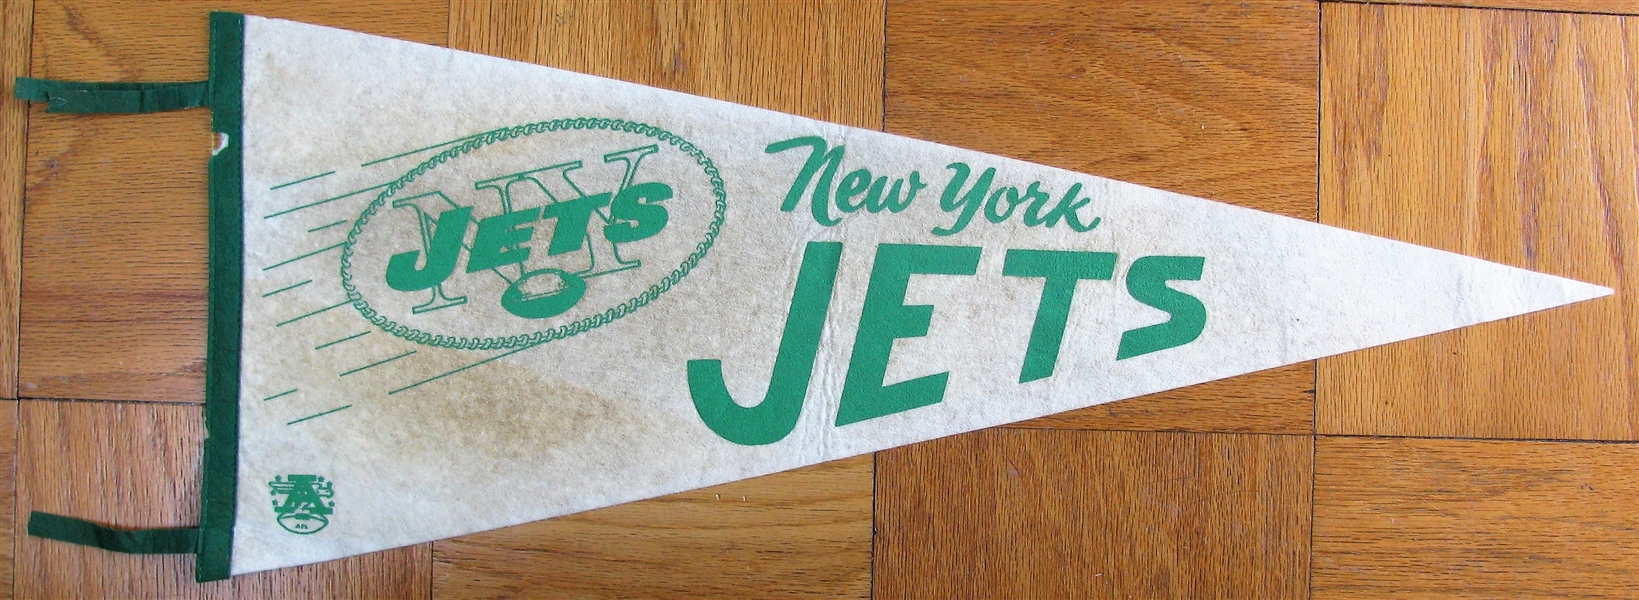 60's NEW YORK JETS AFL PENNANT